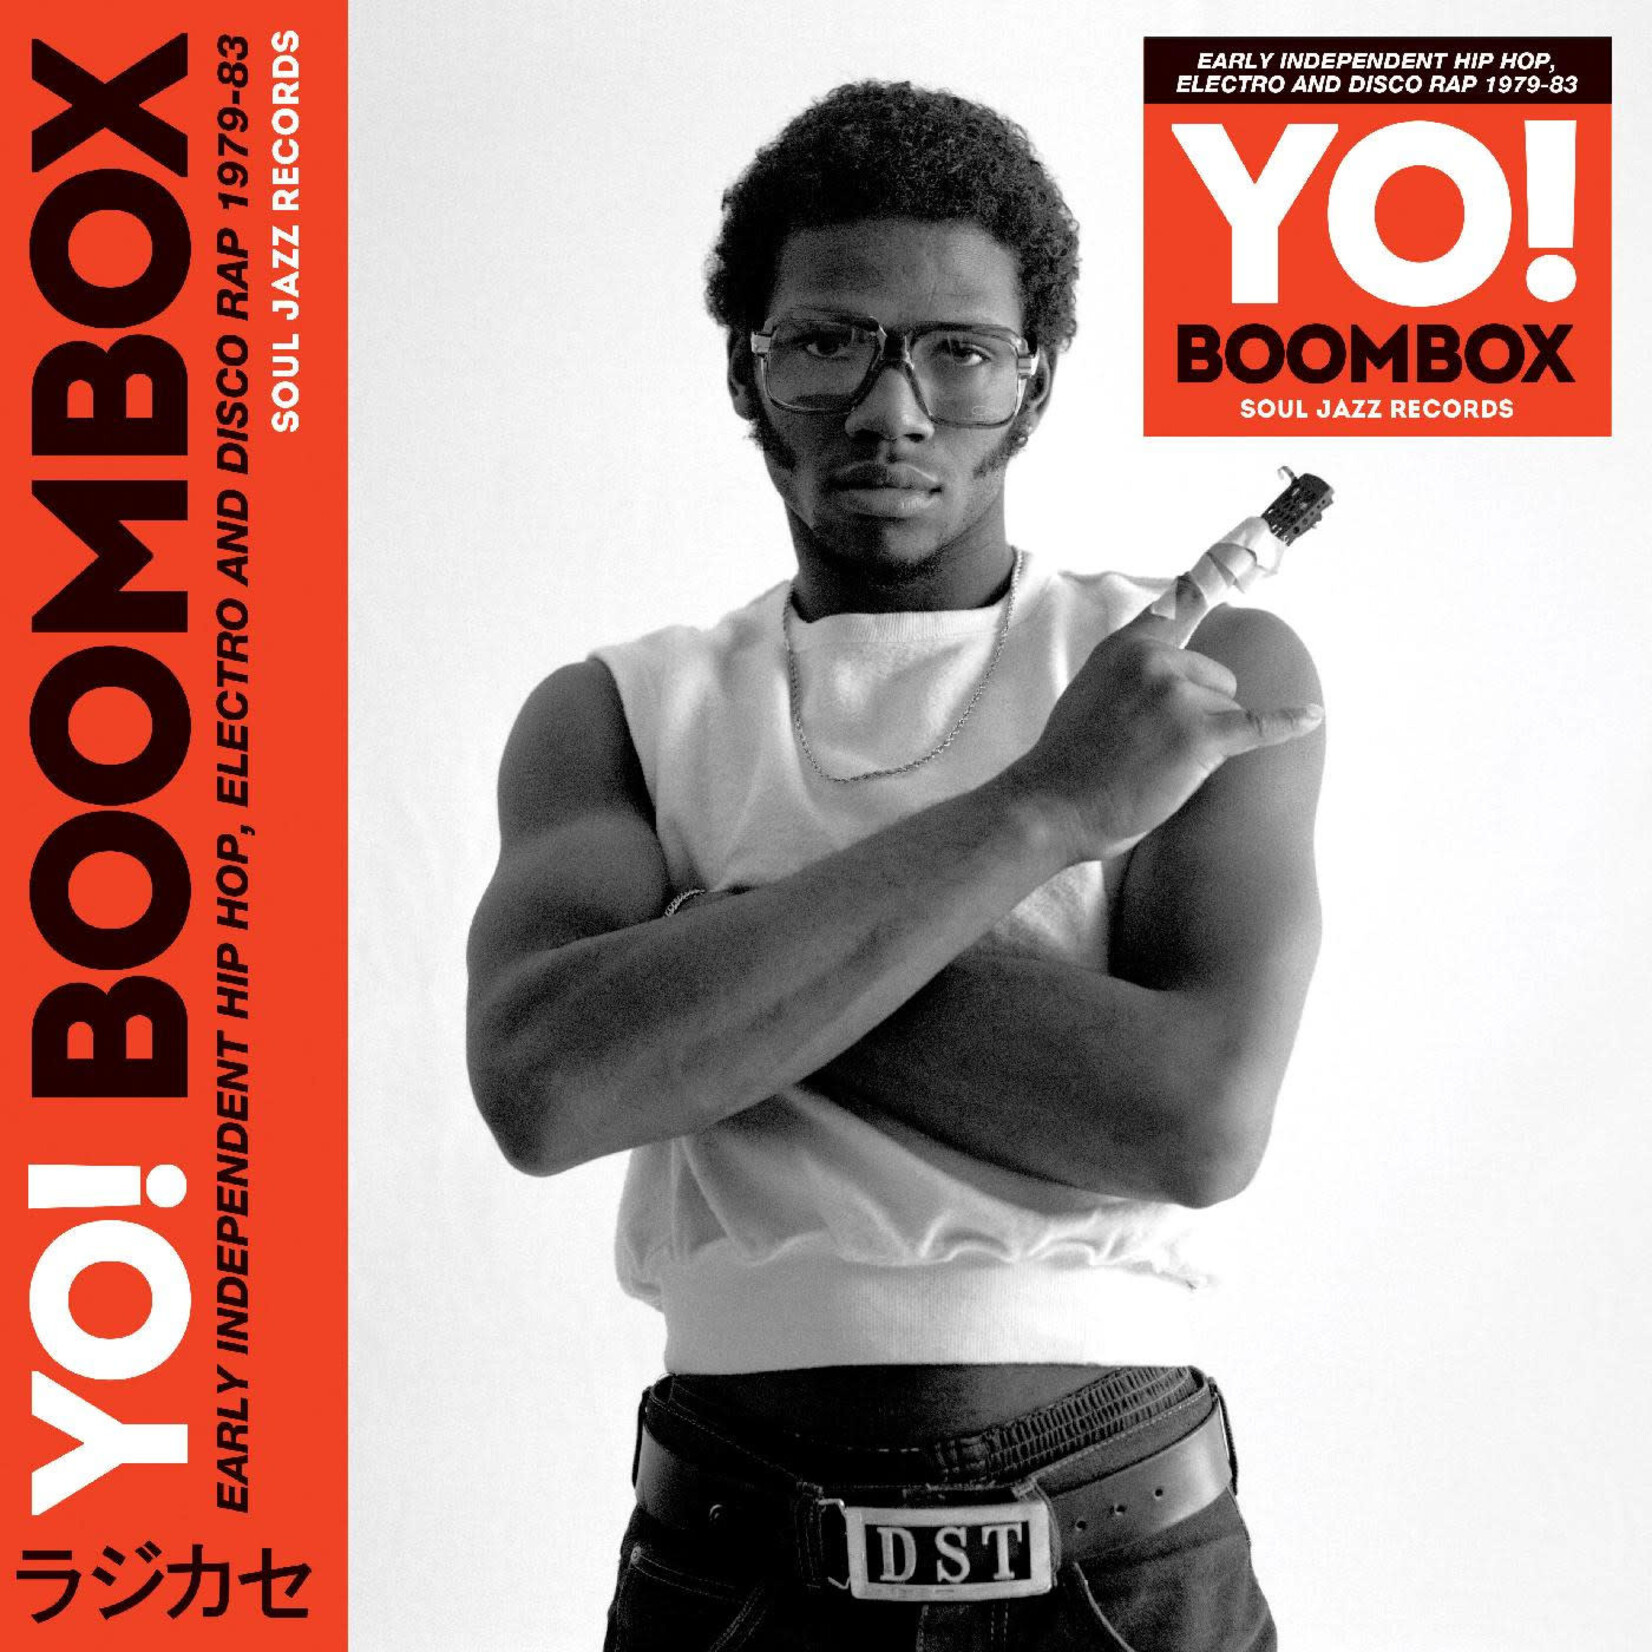 Soul Jazz V/A - Soul Jazz Records presents YO! BOOMBOX: Early Independent Hip Hop, Electro And Disco Rap 1979-83 (3LP+7")